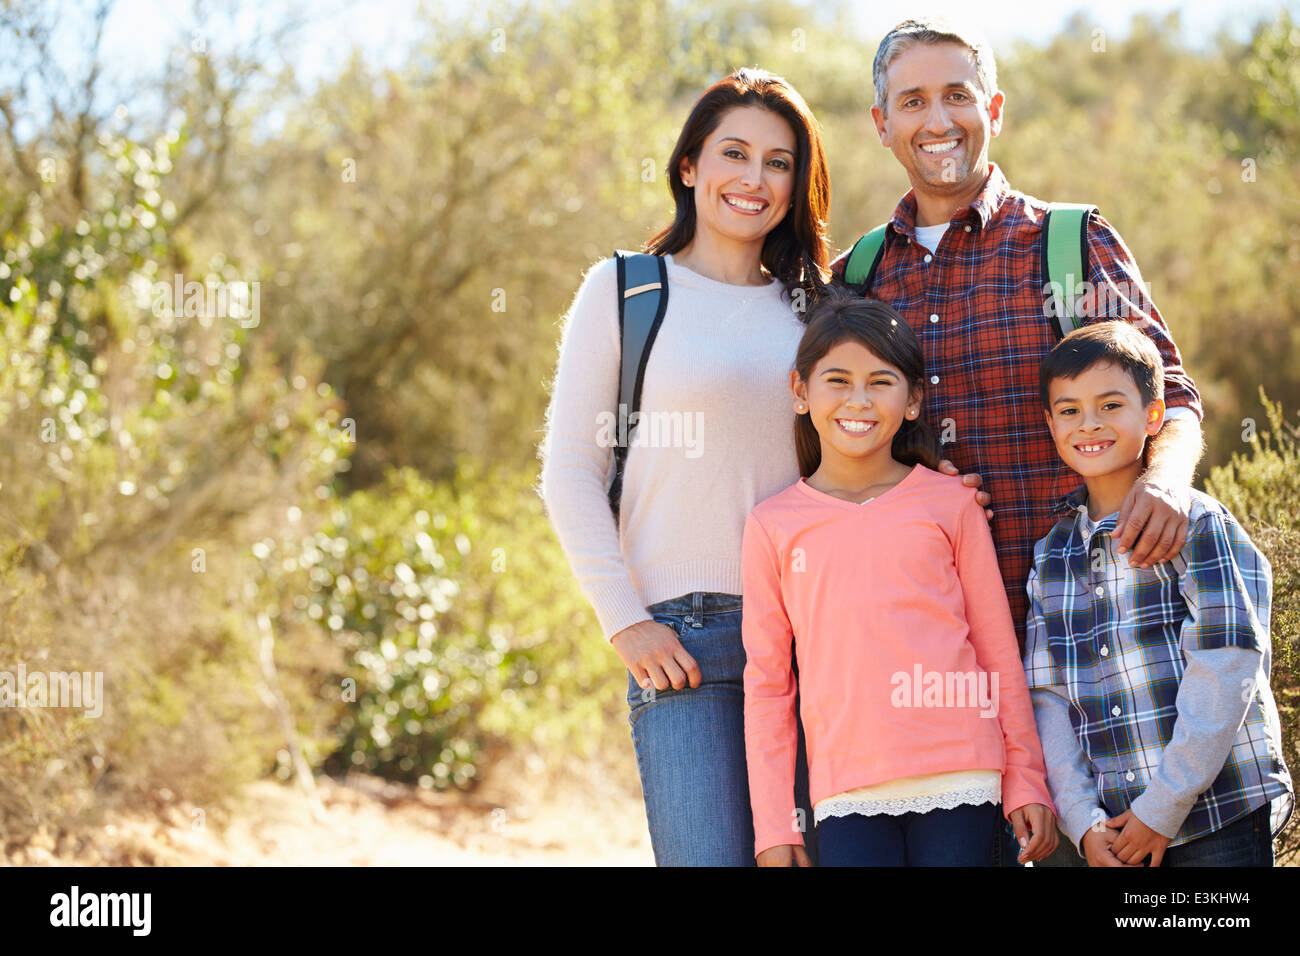 Portrait Of Family Hiking In Countryside Wearing Backpacks Stock Photo